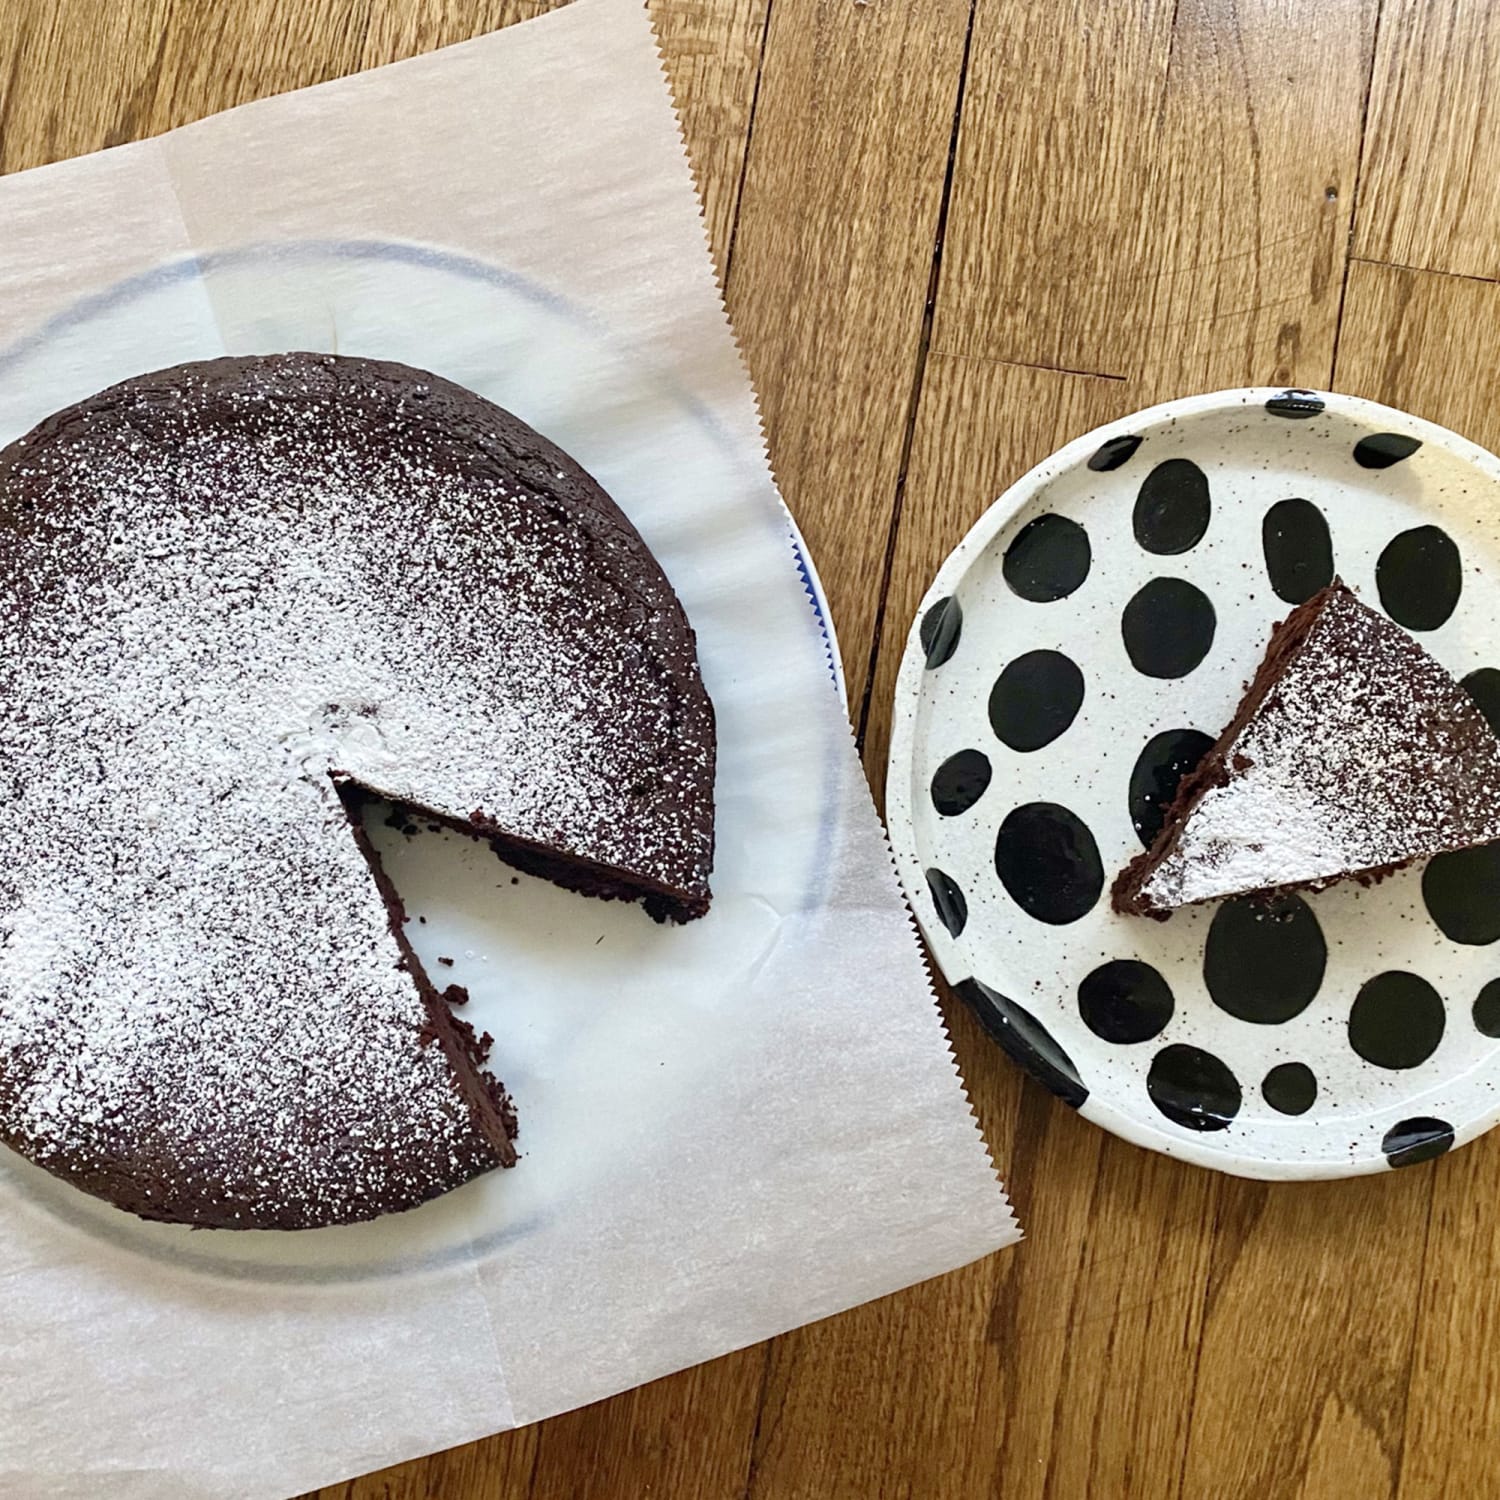 Chocolate Olive Oil Cake with Creme Fraiche // The Linnet Kitchen